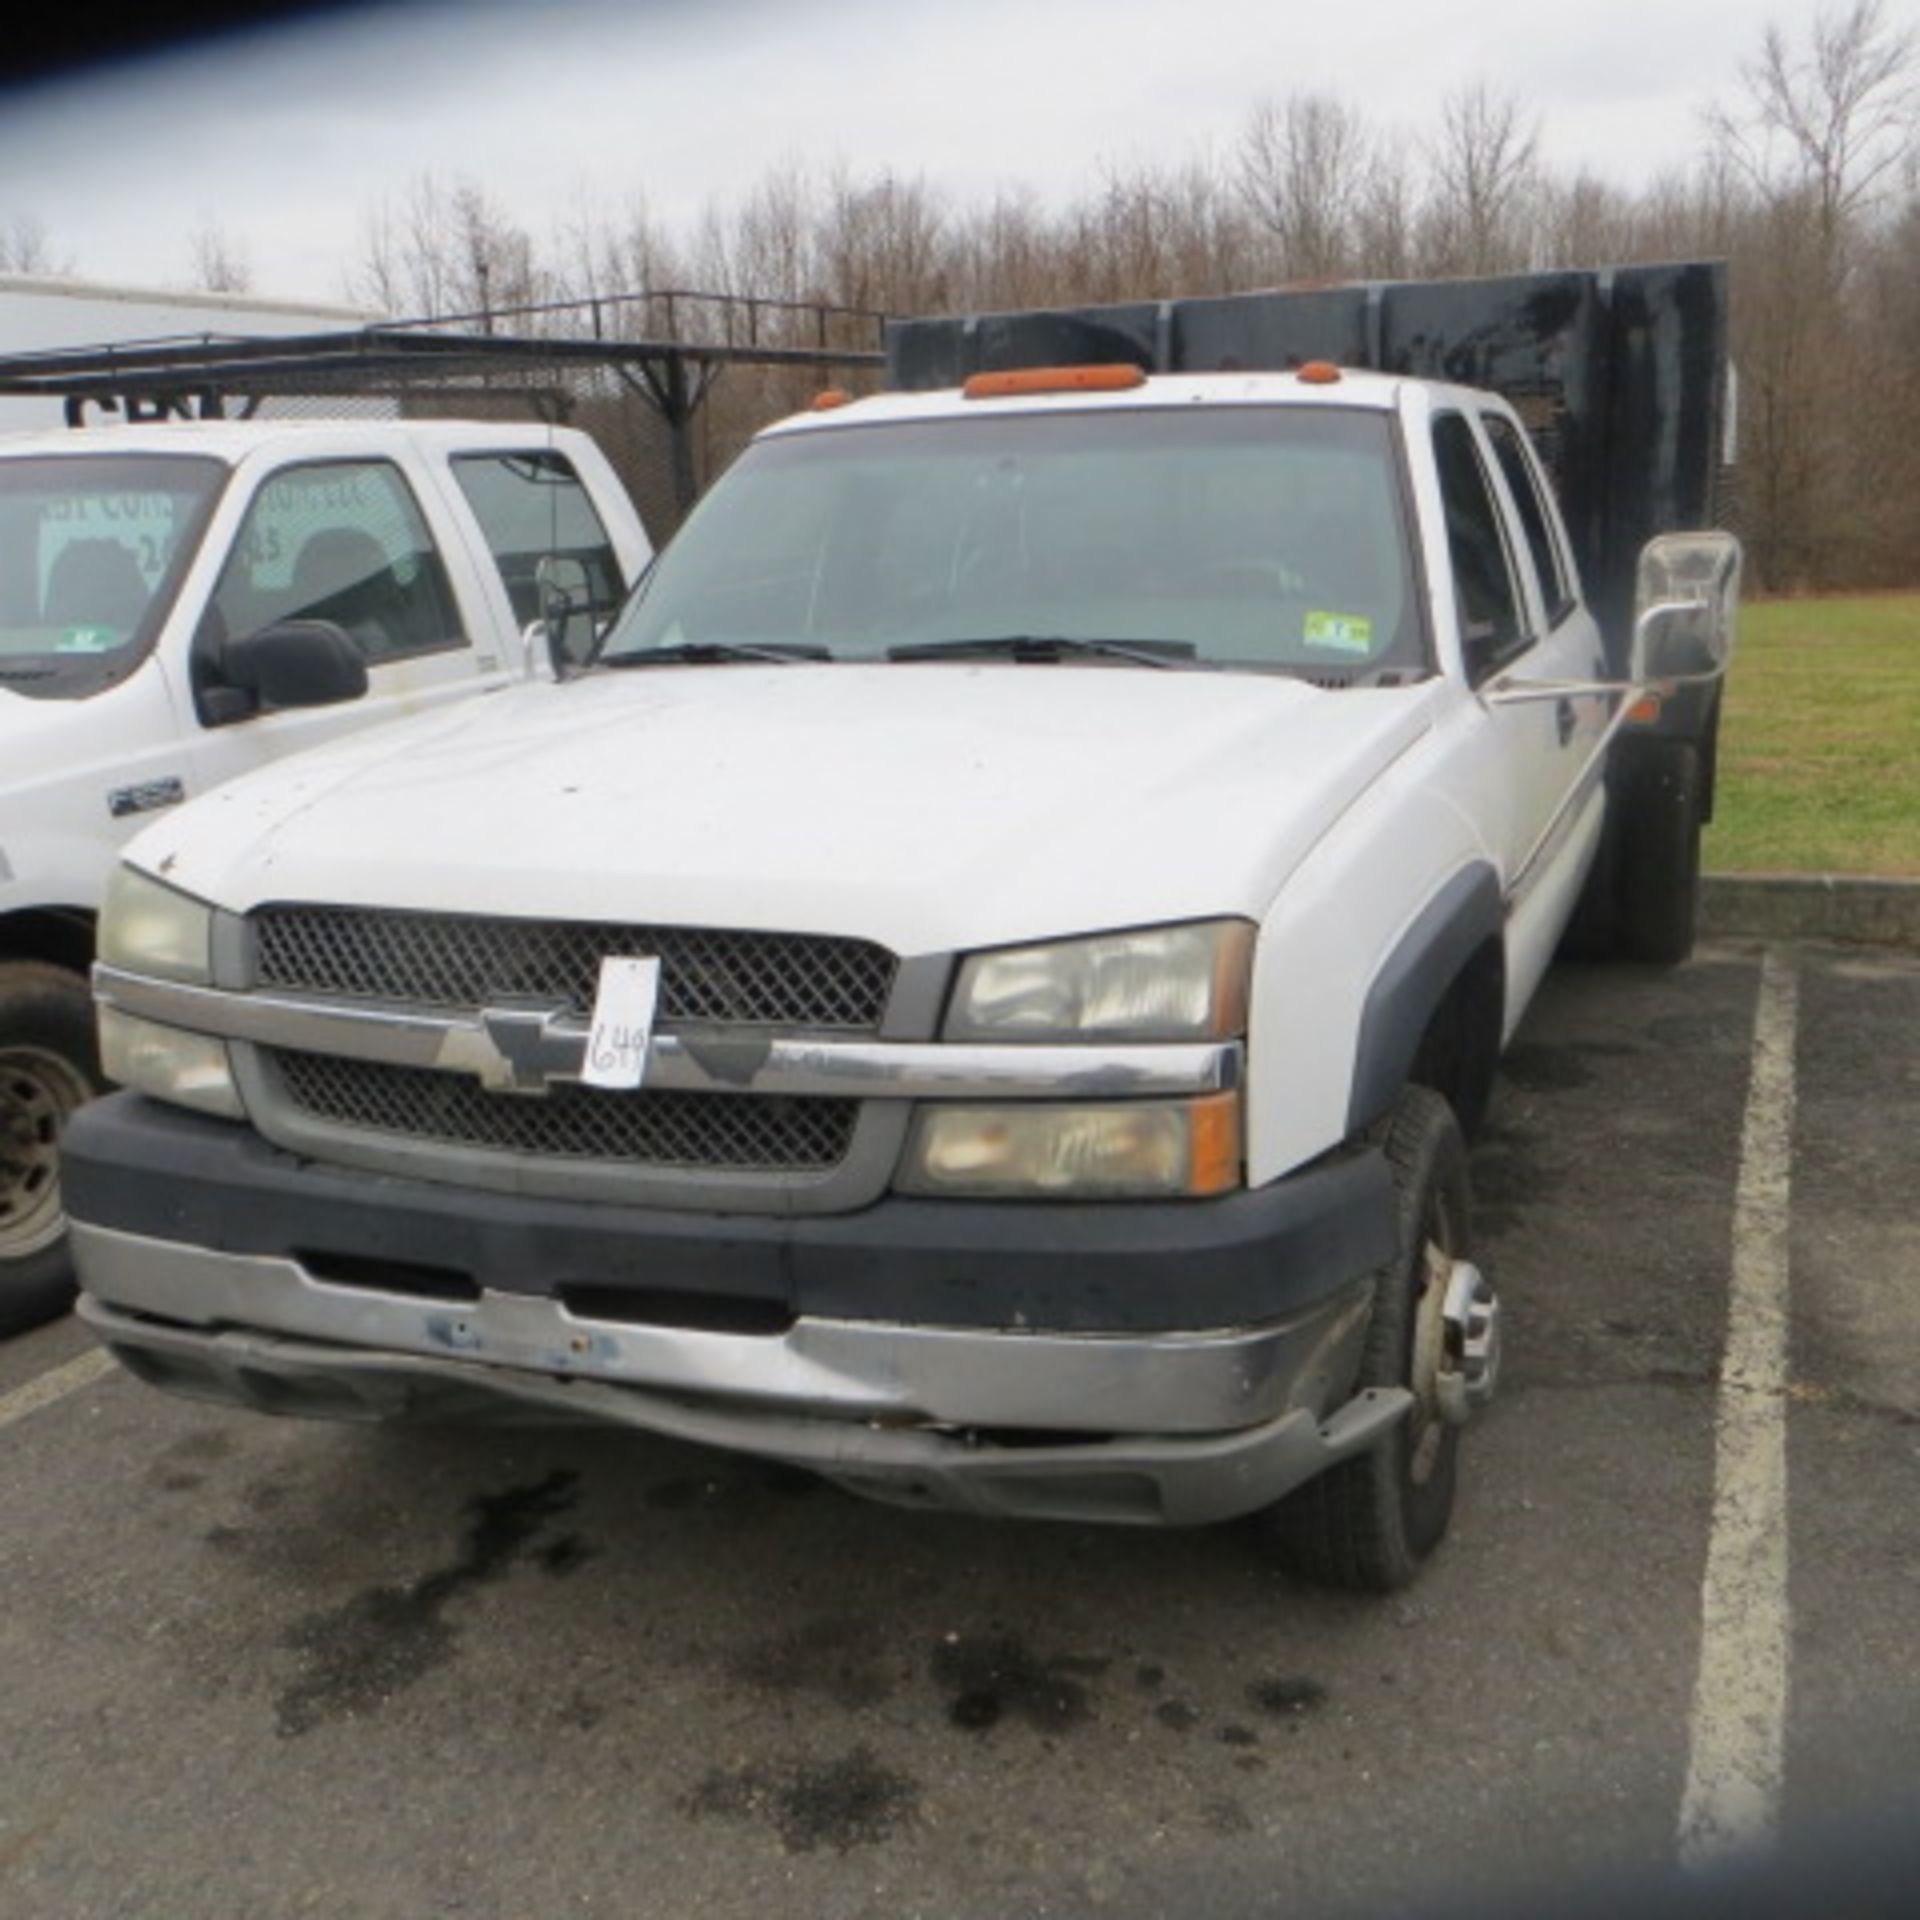 2003 CHEVY 3500 DUALLY CREW CAB STEEL STAKEBODY W/ DIAMOND PLATE SIDES…